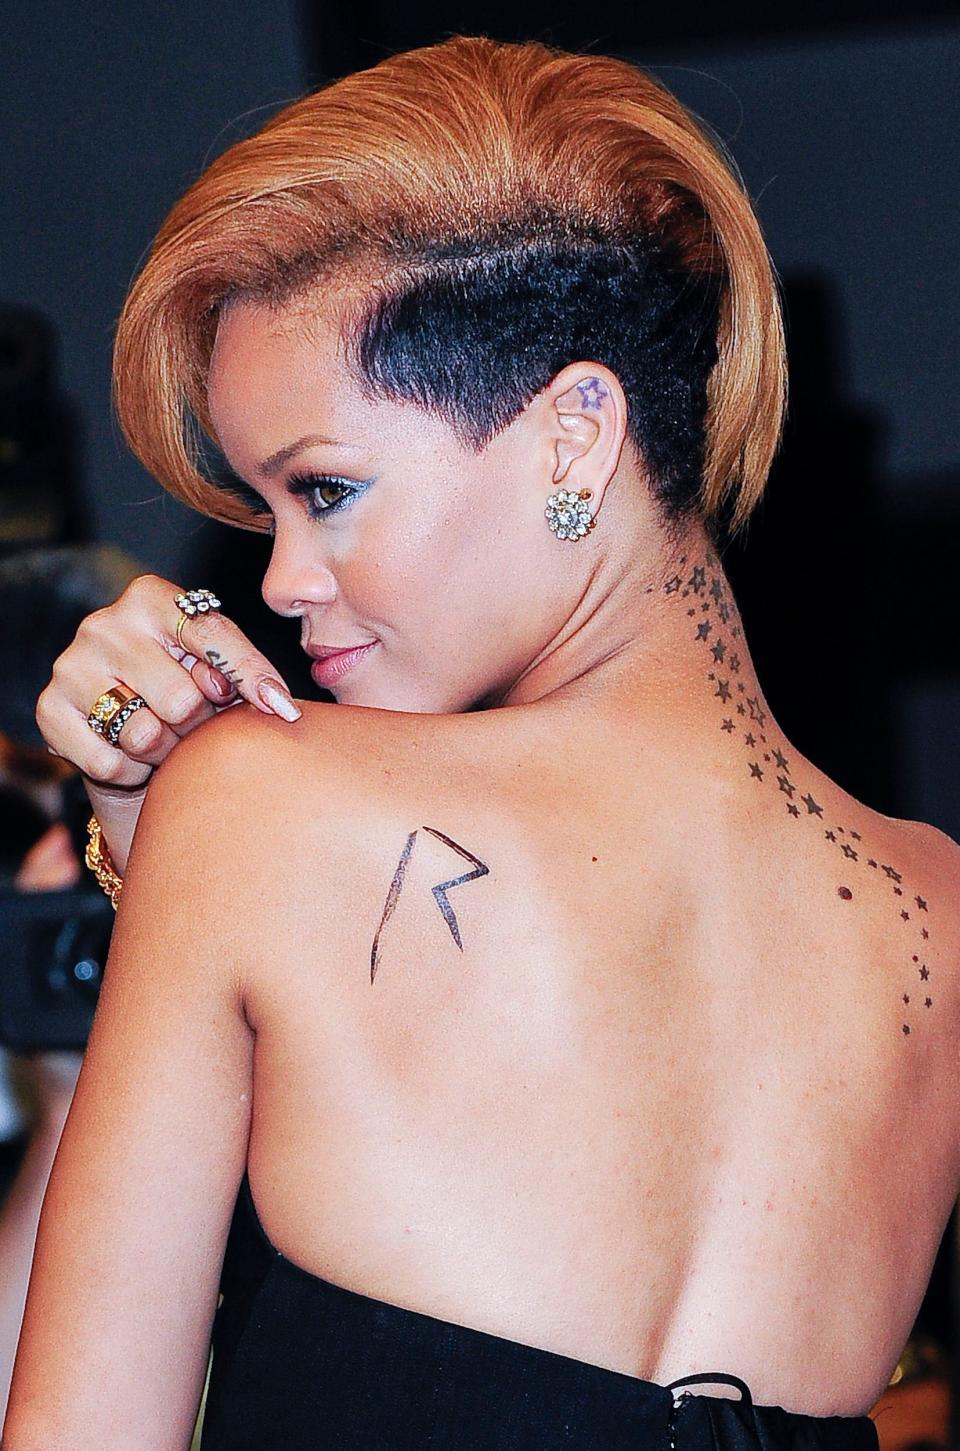 Rihanna poses with her tattoos in 2009